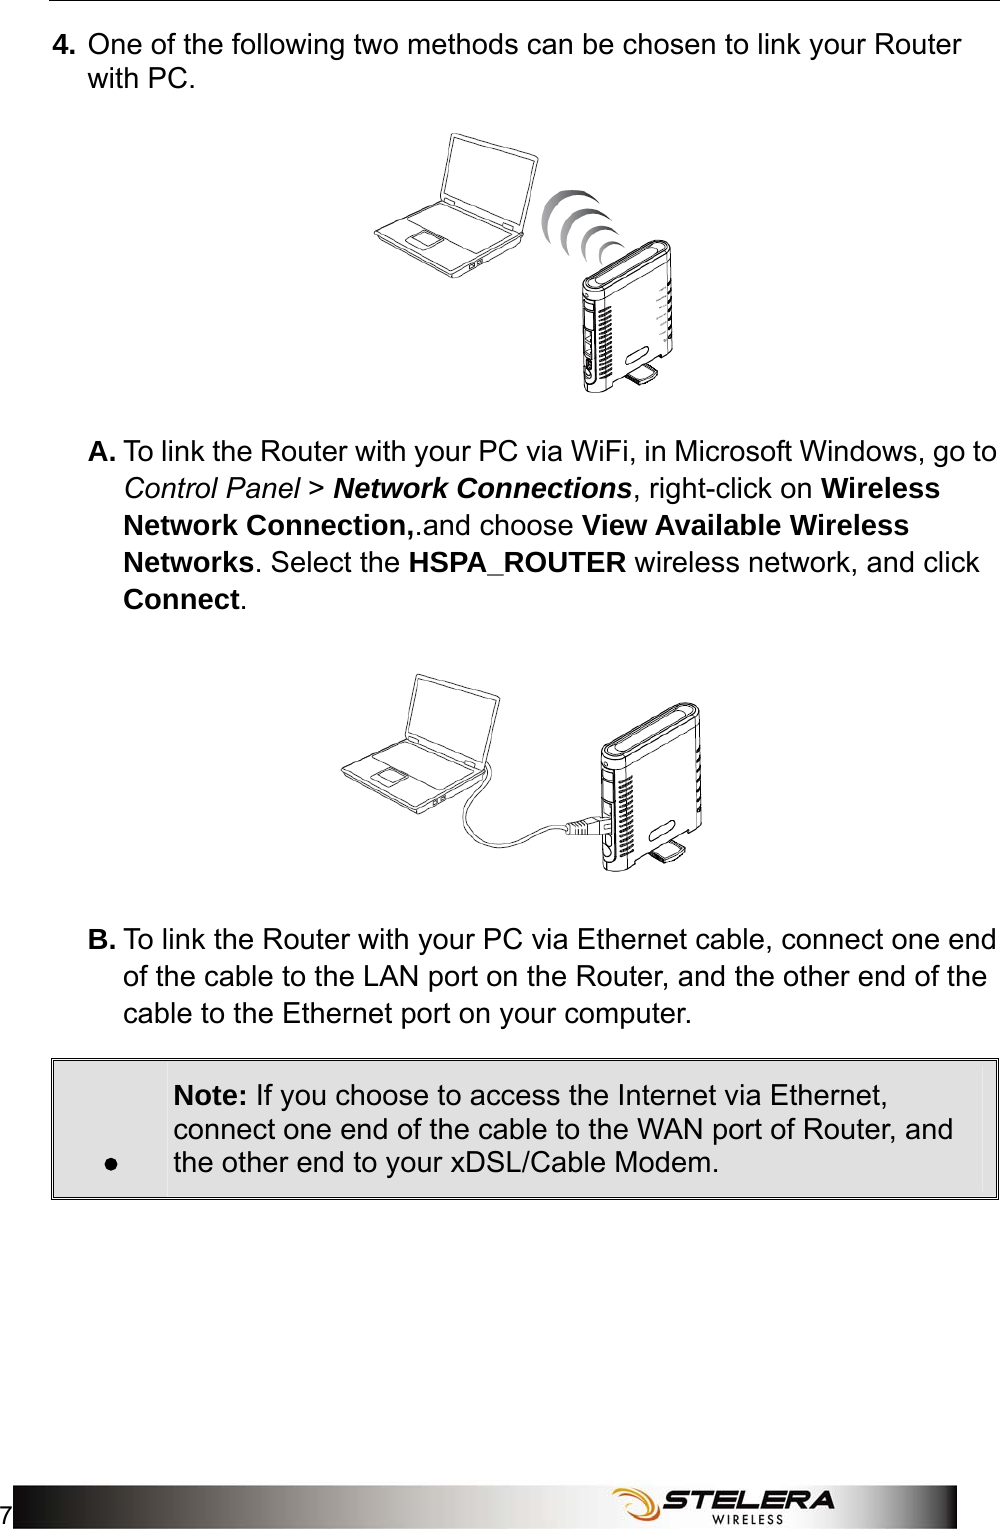  Installation 7 4. One of the following two methods can be chosen to link your Router with PC.  A. To link the Router with your PC via WiFi, in Microsoft Windows, go to Control Panel &gt; Network Connections, right-click on Wireless Network Connection,.and choose View Available Wireless Networks. Select the HSPA_ROUTER wireless network, and click Connect.   B. To link the Router with your PC via Ethernet cable, connect one end of the cable to the LAN port on the Router, and the other end of the cable to the Ethernet port on your computer. . Note: If you choose to access the Internet via Ethernet, connect one end of the cable to the WAN port of Router, and the other end to your xDSL/Cable Modem.       